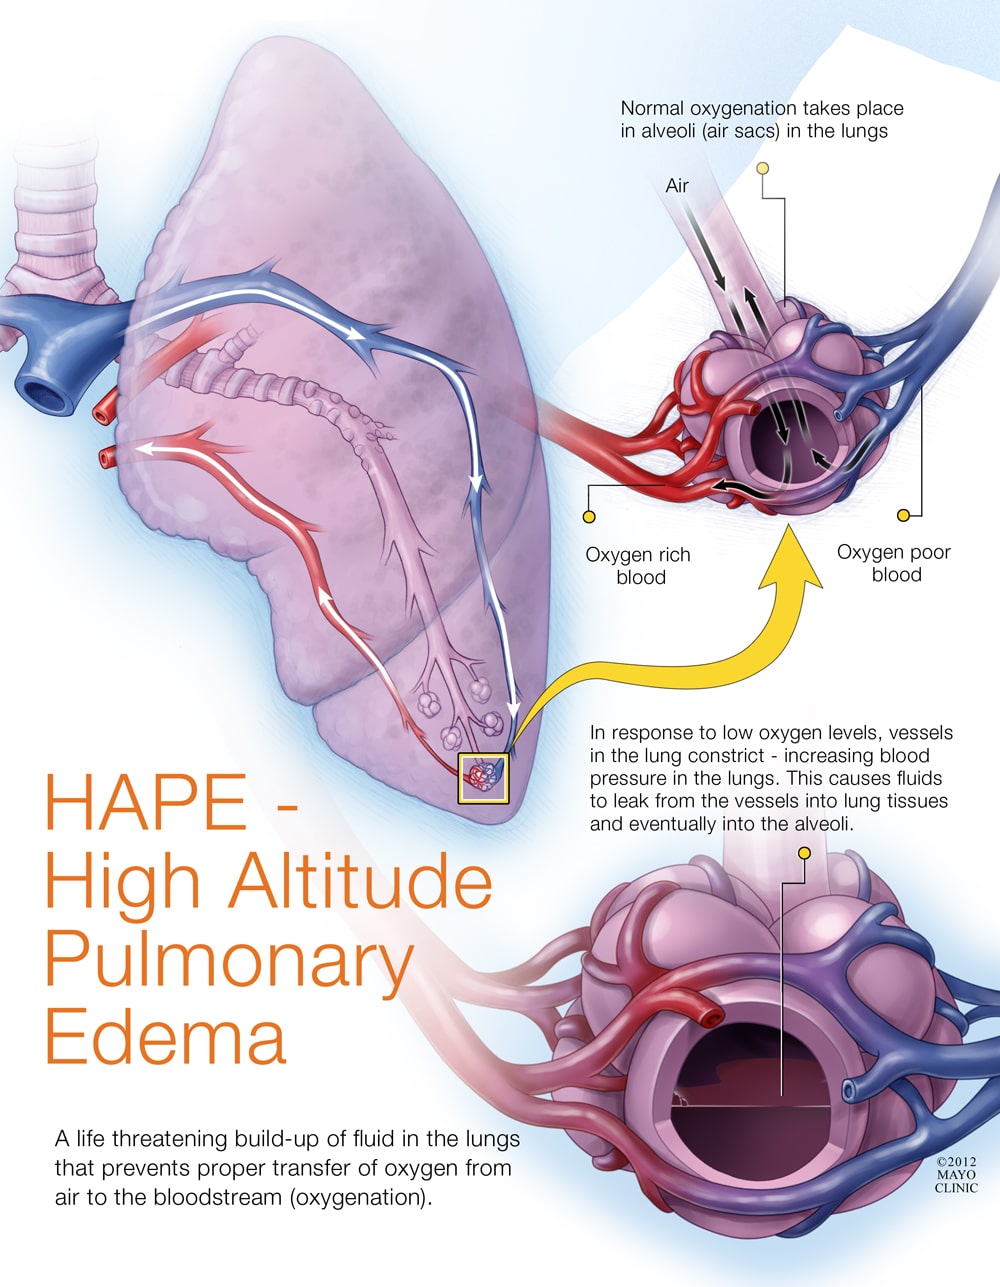 The science of how high altitudes allow HAPE to cause fluid accumulation in the lungs.